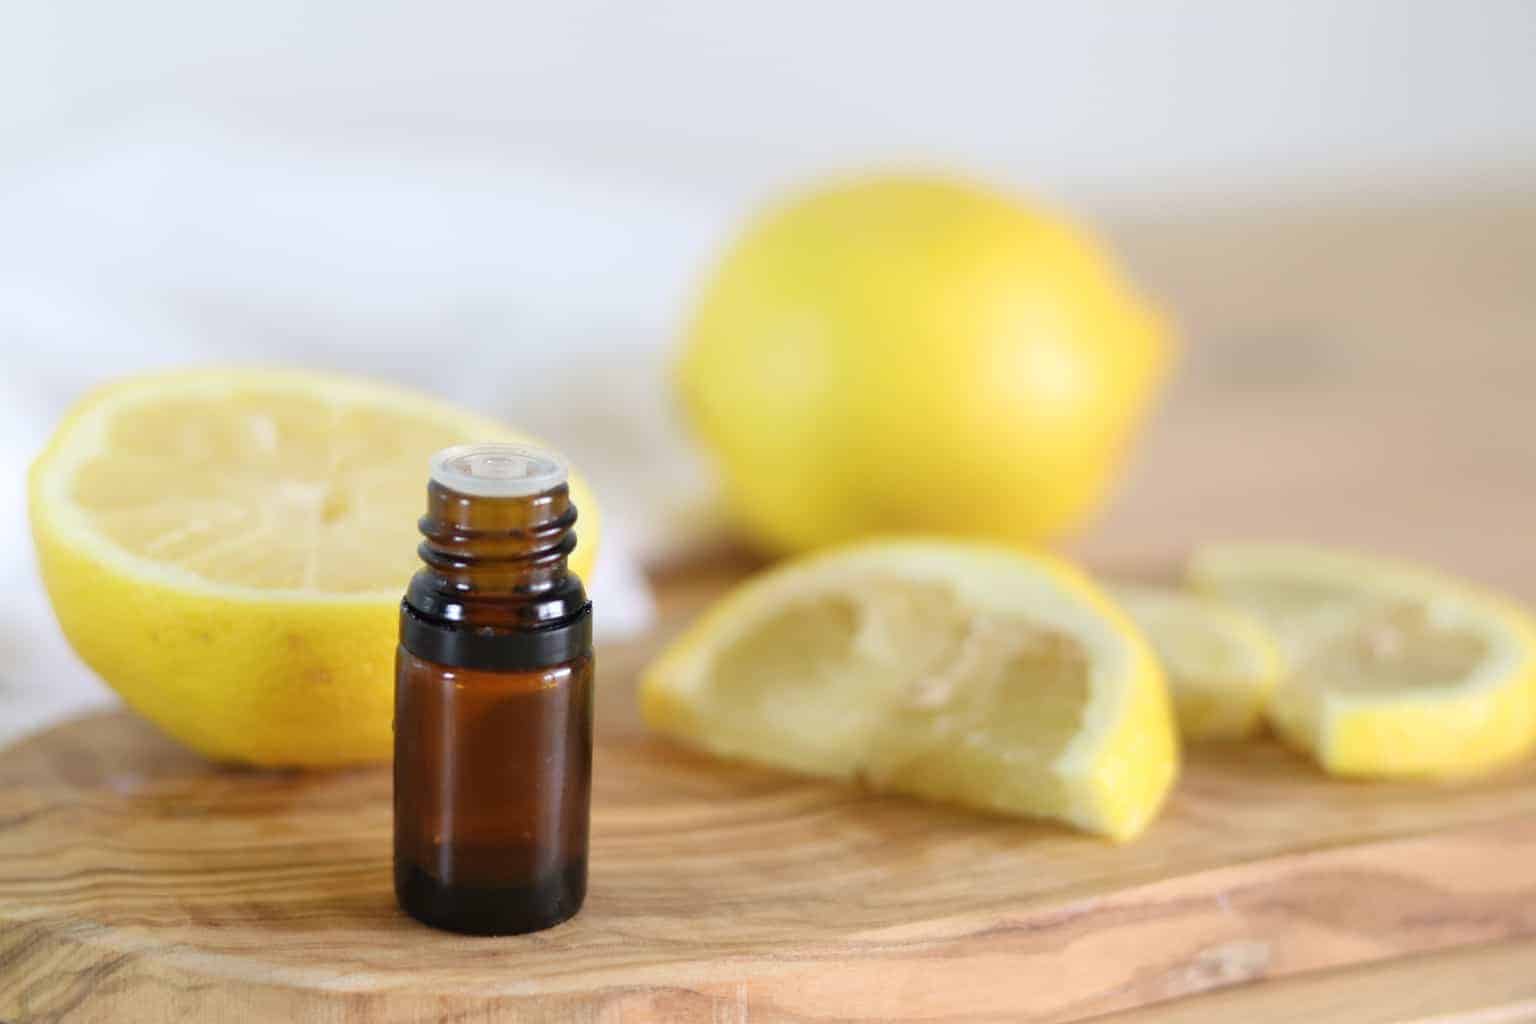 Essential oil bottle on wooden board with fresh lemons in background.